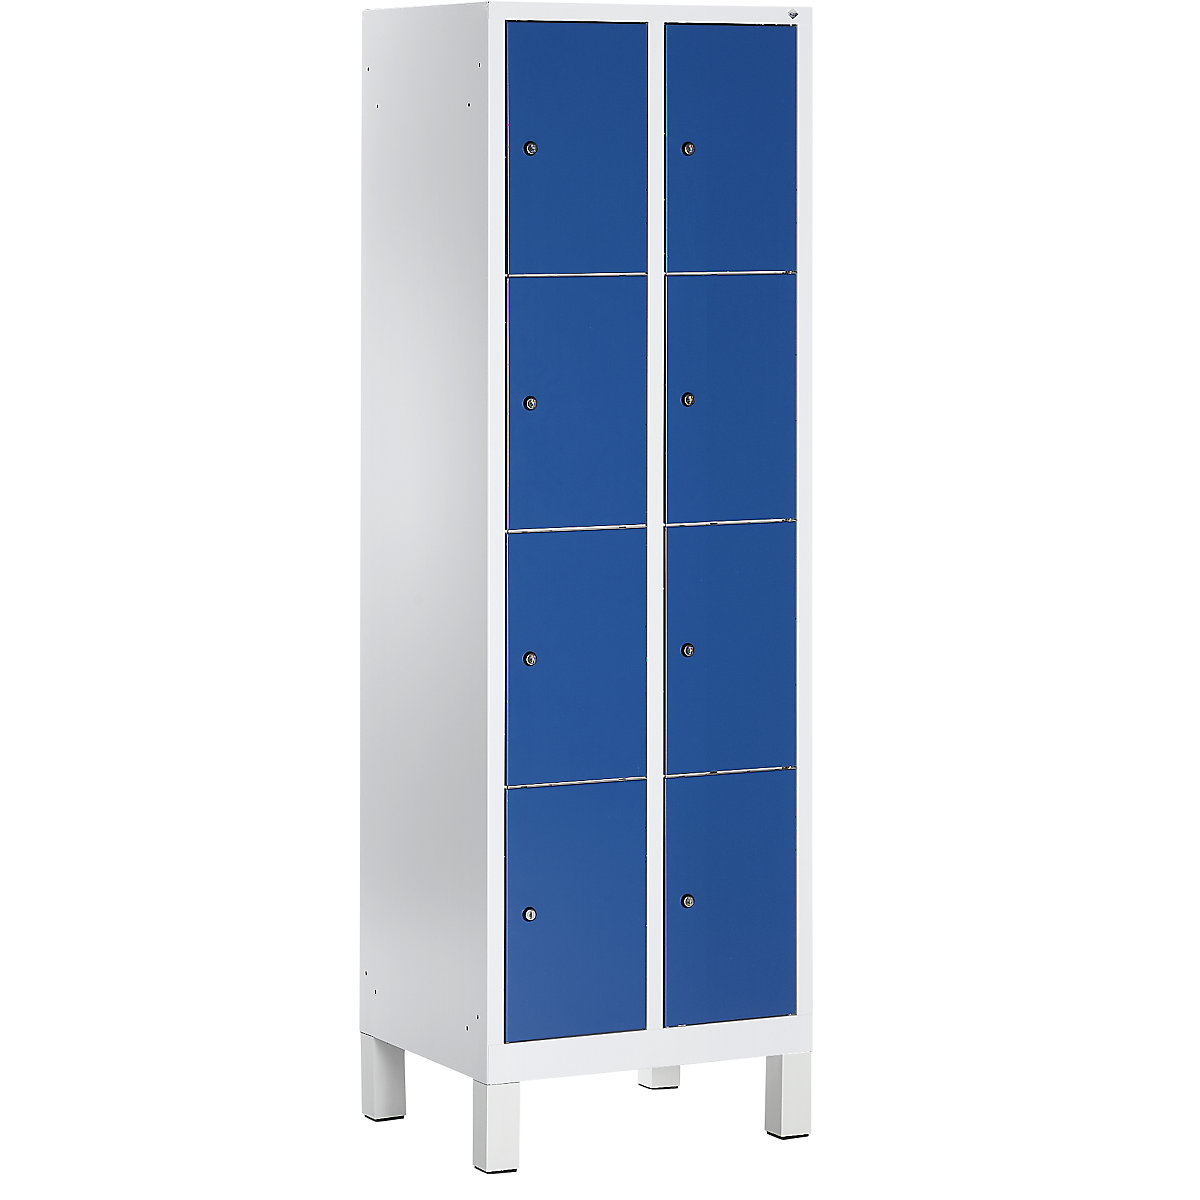 EVOLO cloakroom locker – C+P, with plastic feet, 8 compartments, compartment width 300 mm, light grey / gentian blue-7